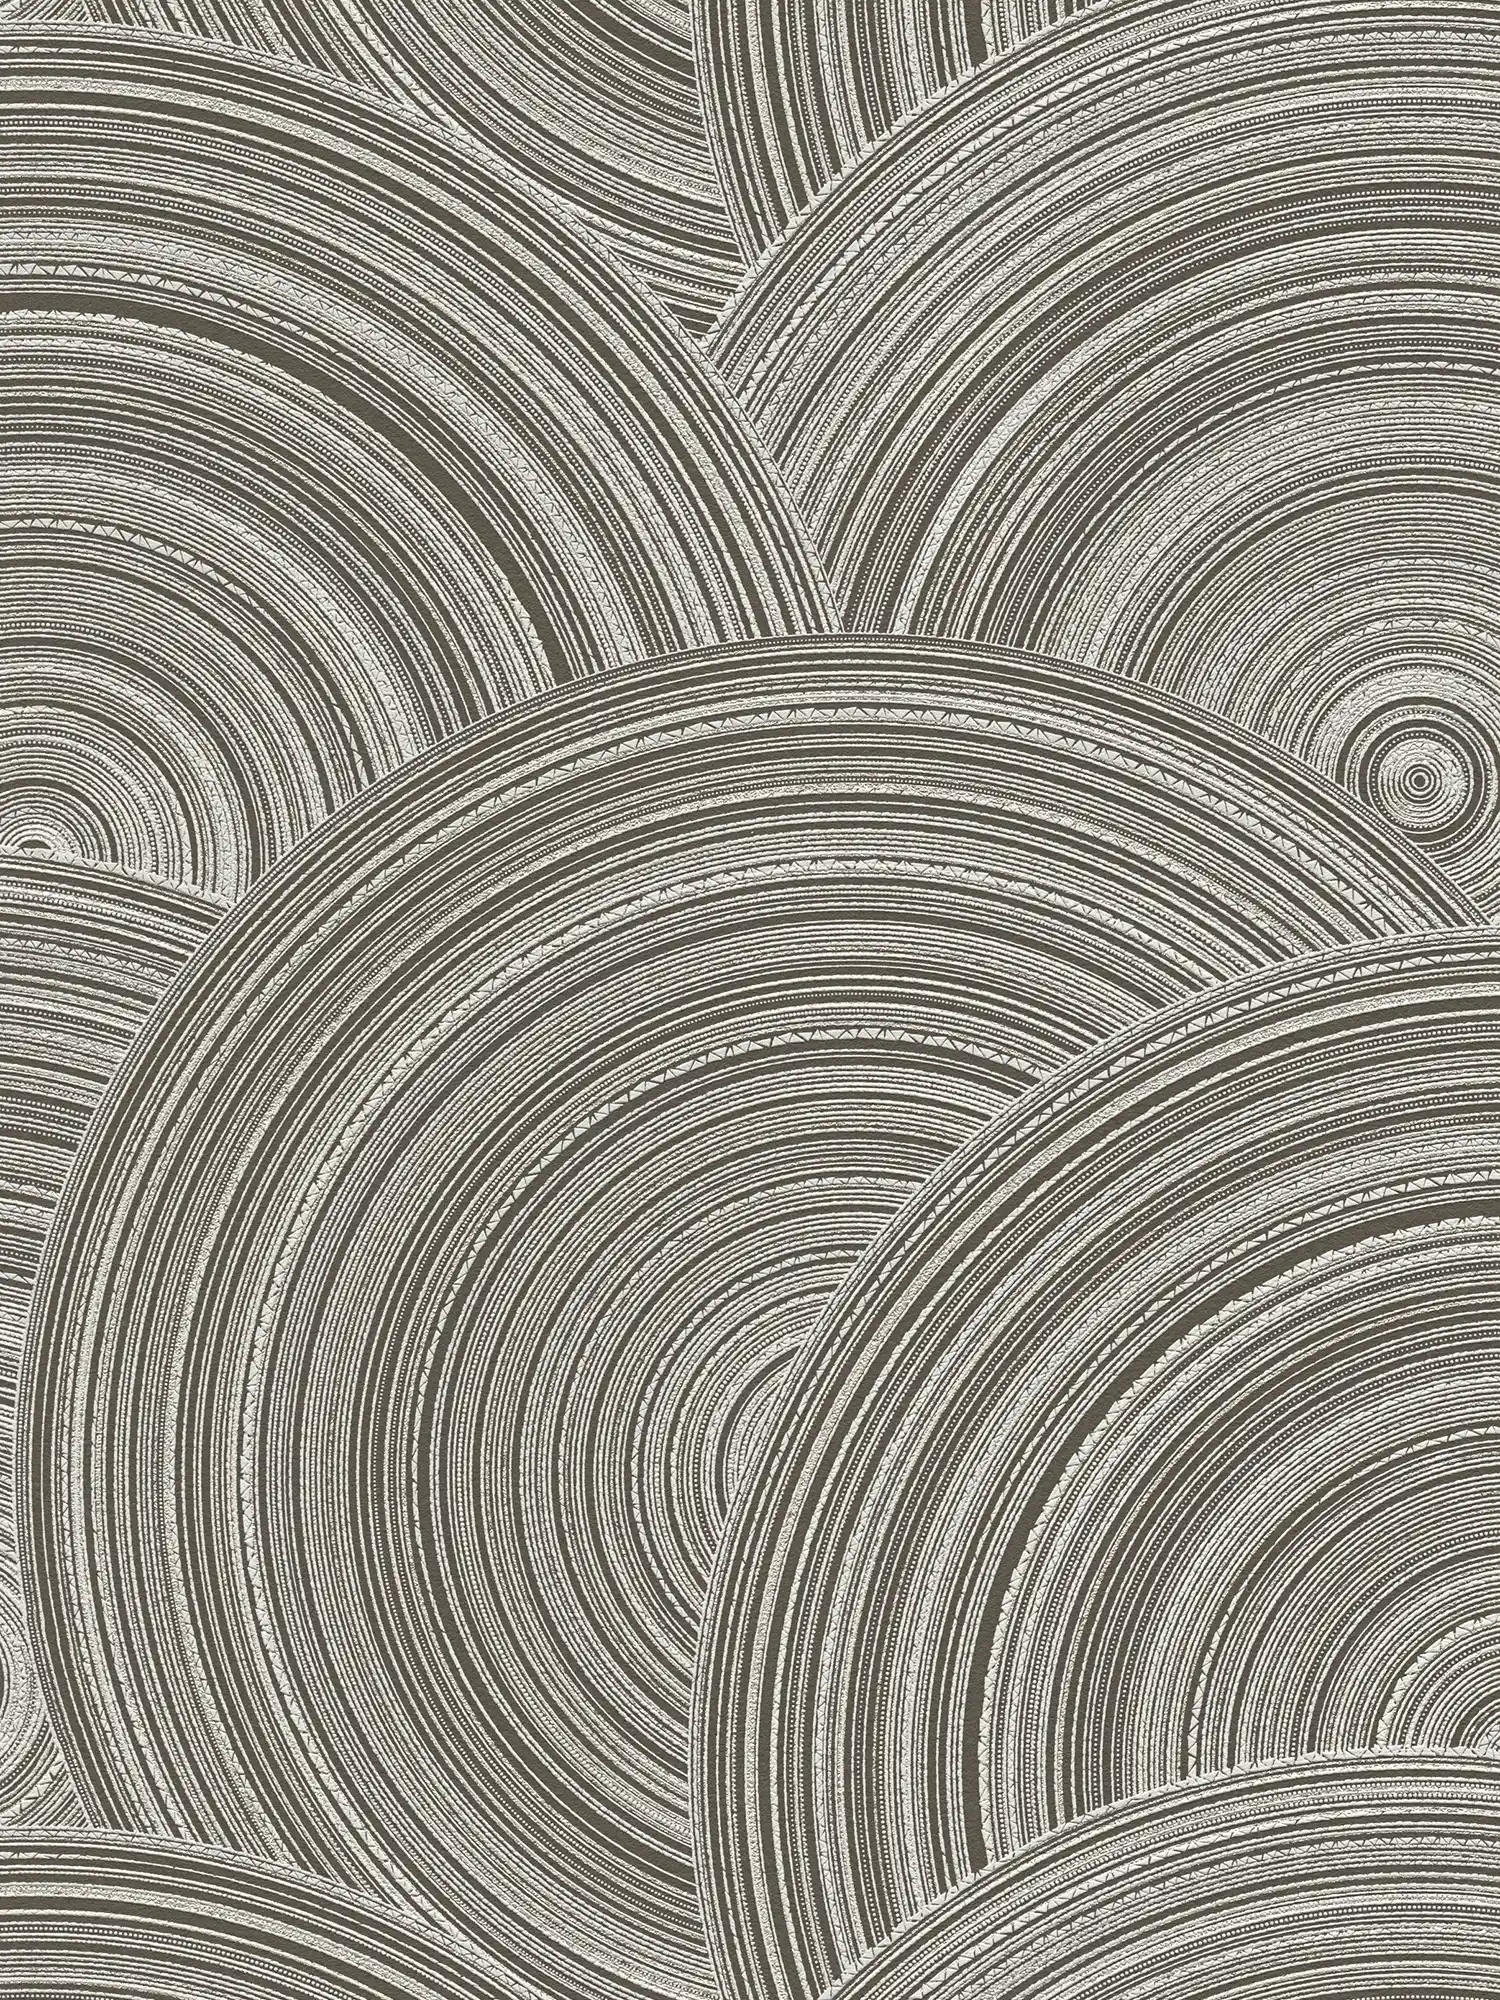 Circle wallpaper with ethno design with texture effect - brown, cream
